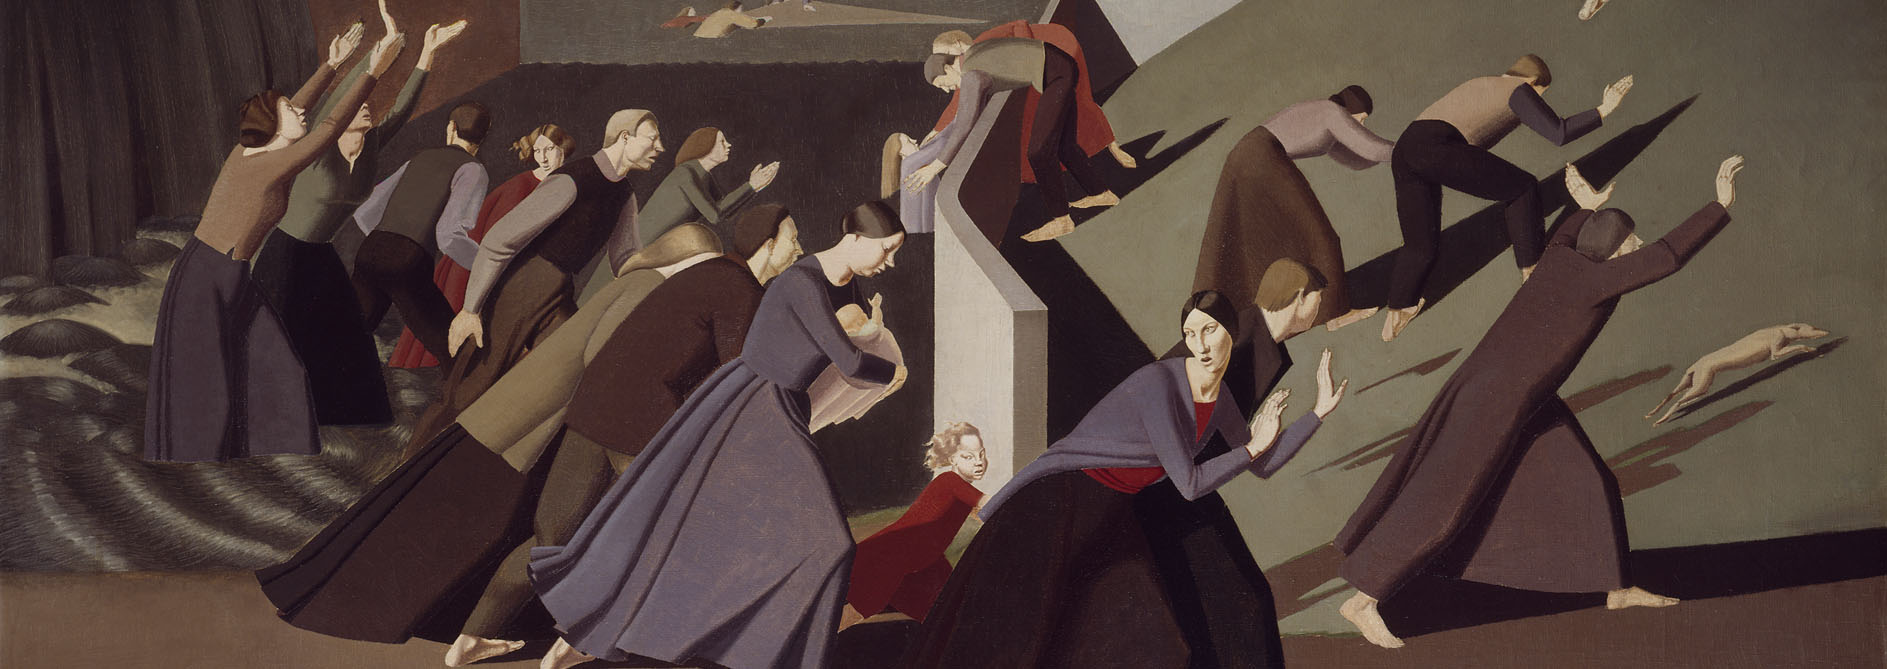 Winifred Knights: 'The Deluge', 1920. © The Estate of Winifred Knights